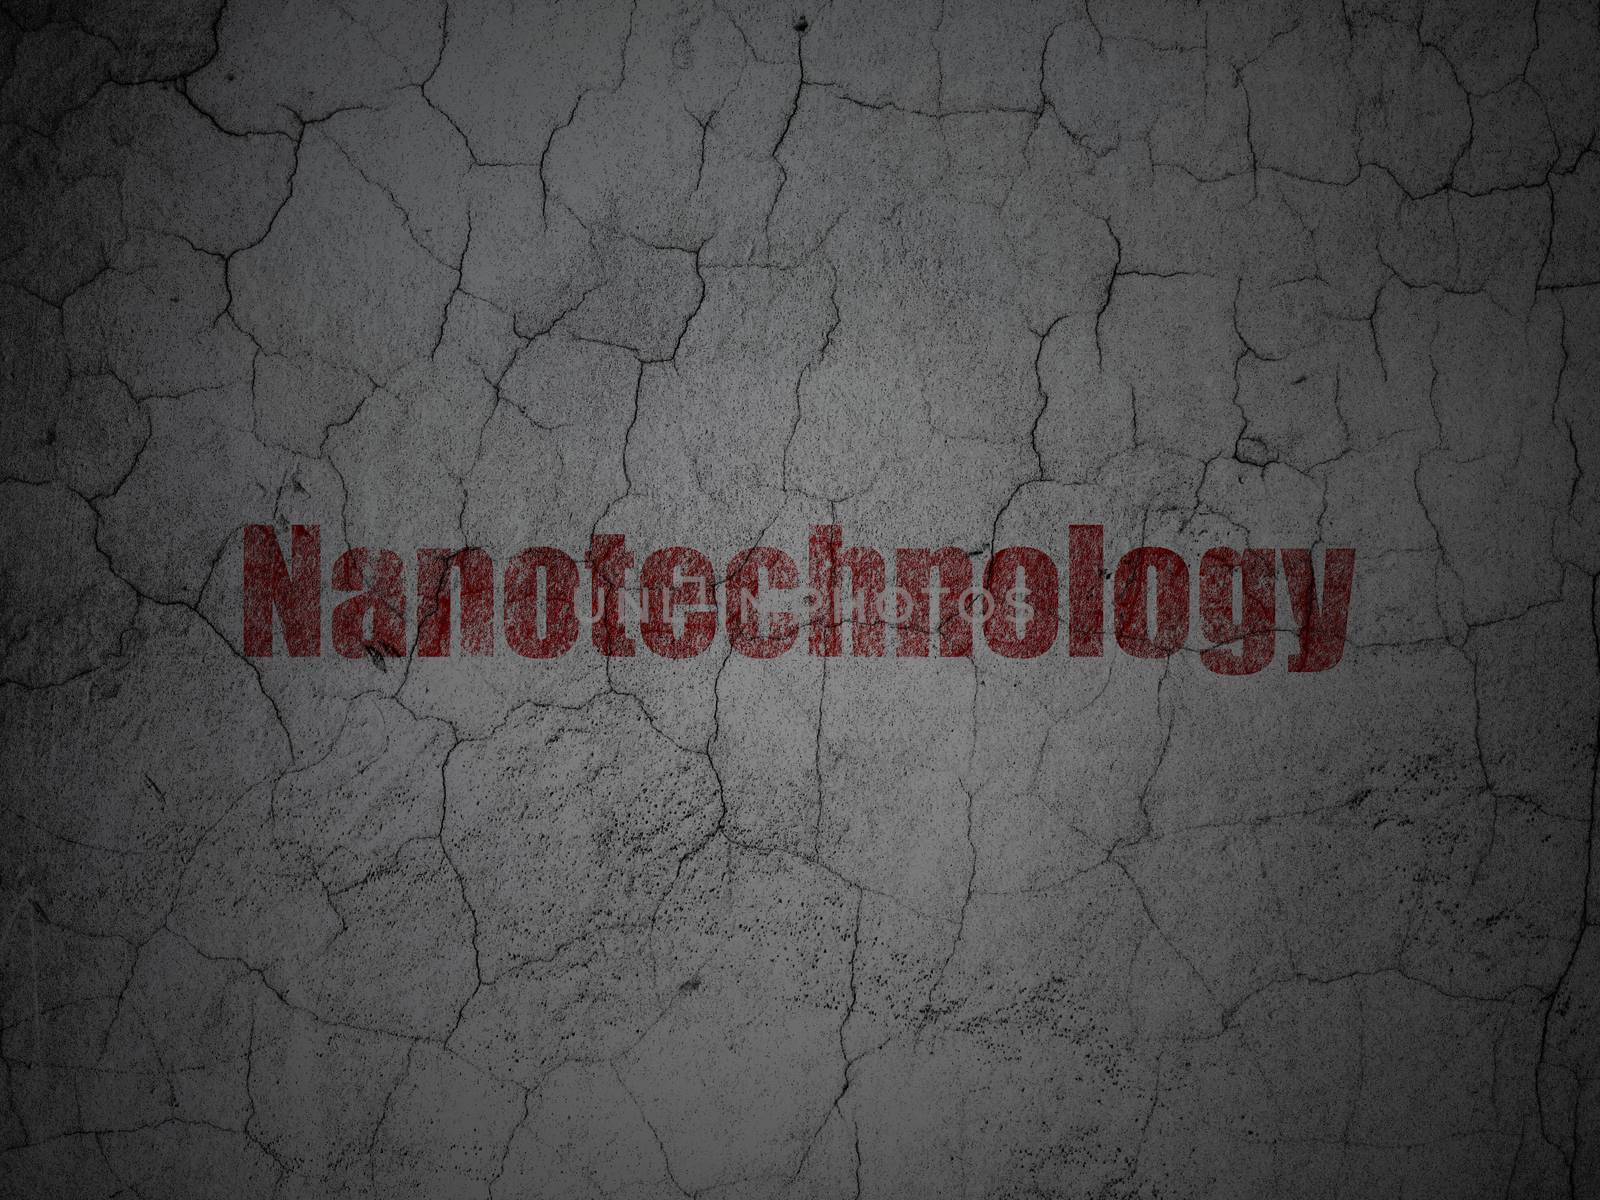 Science concept: Red Nanotechnology on grunge textured concrete wall background